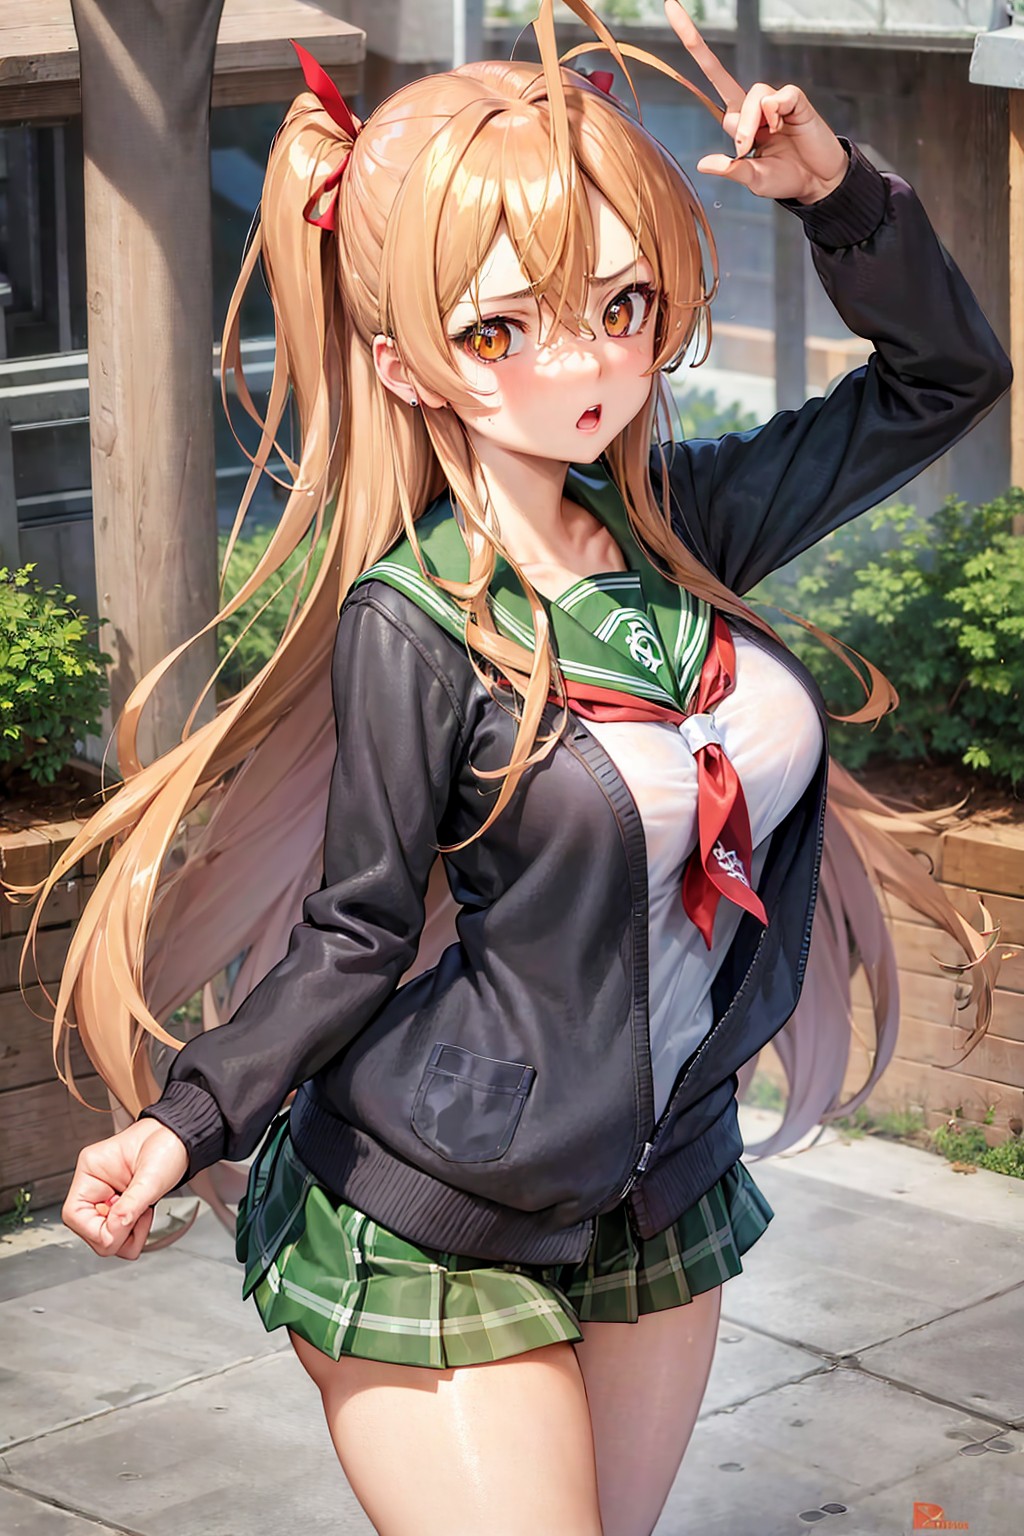 Ai Art] Rei Miyamoto - High School of the Dead by The-Sanctuaire